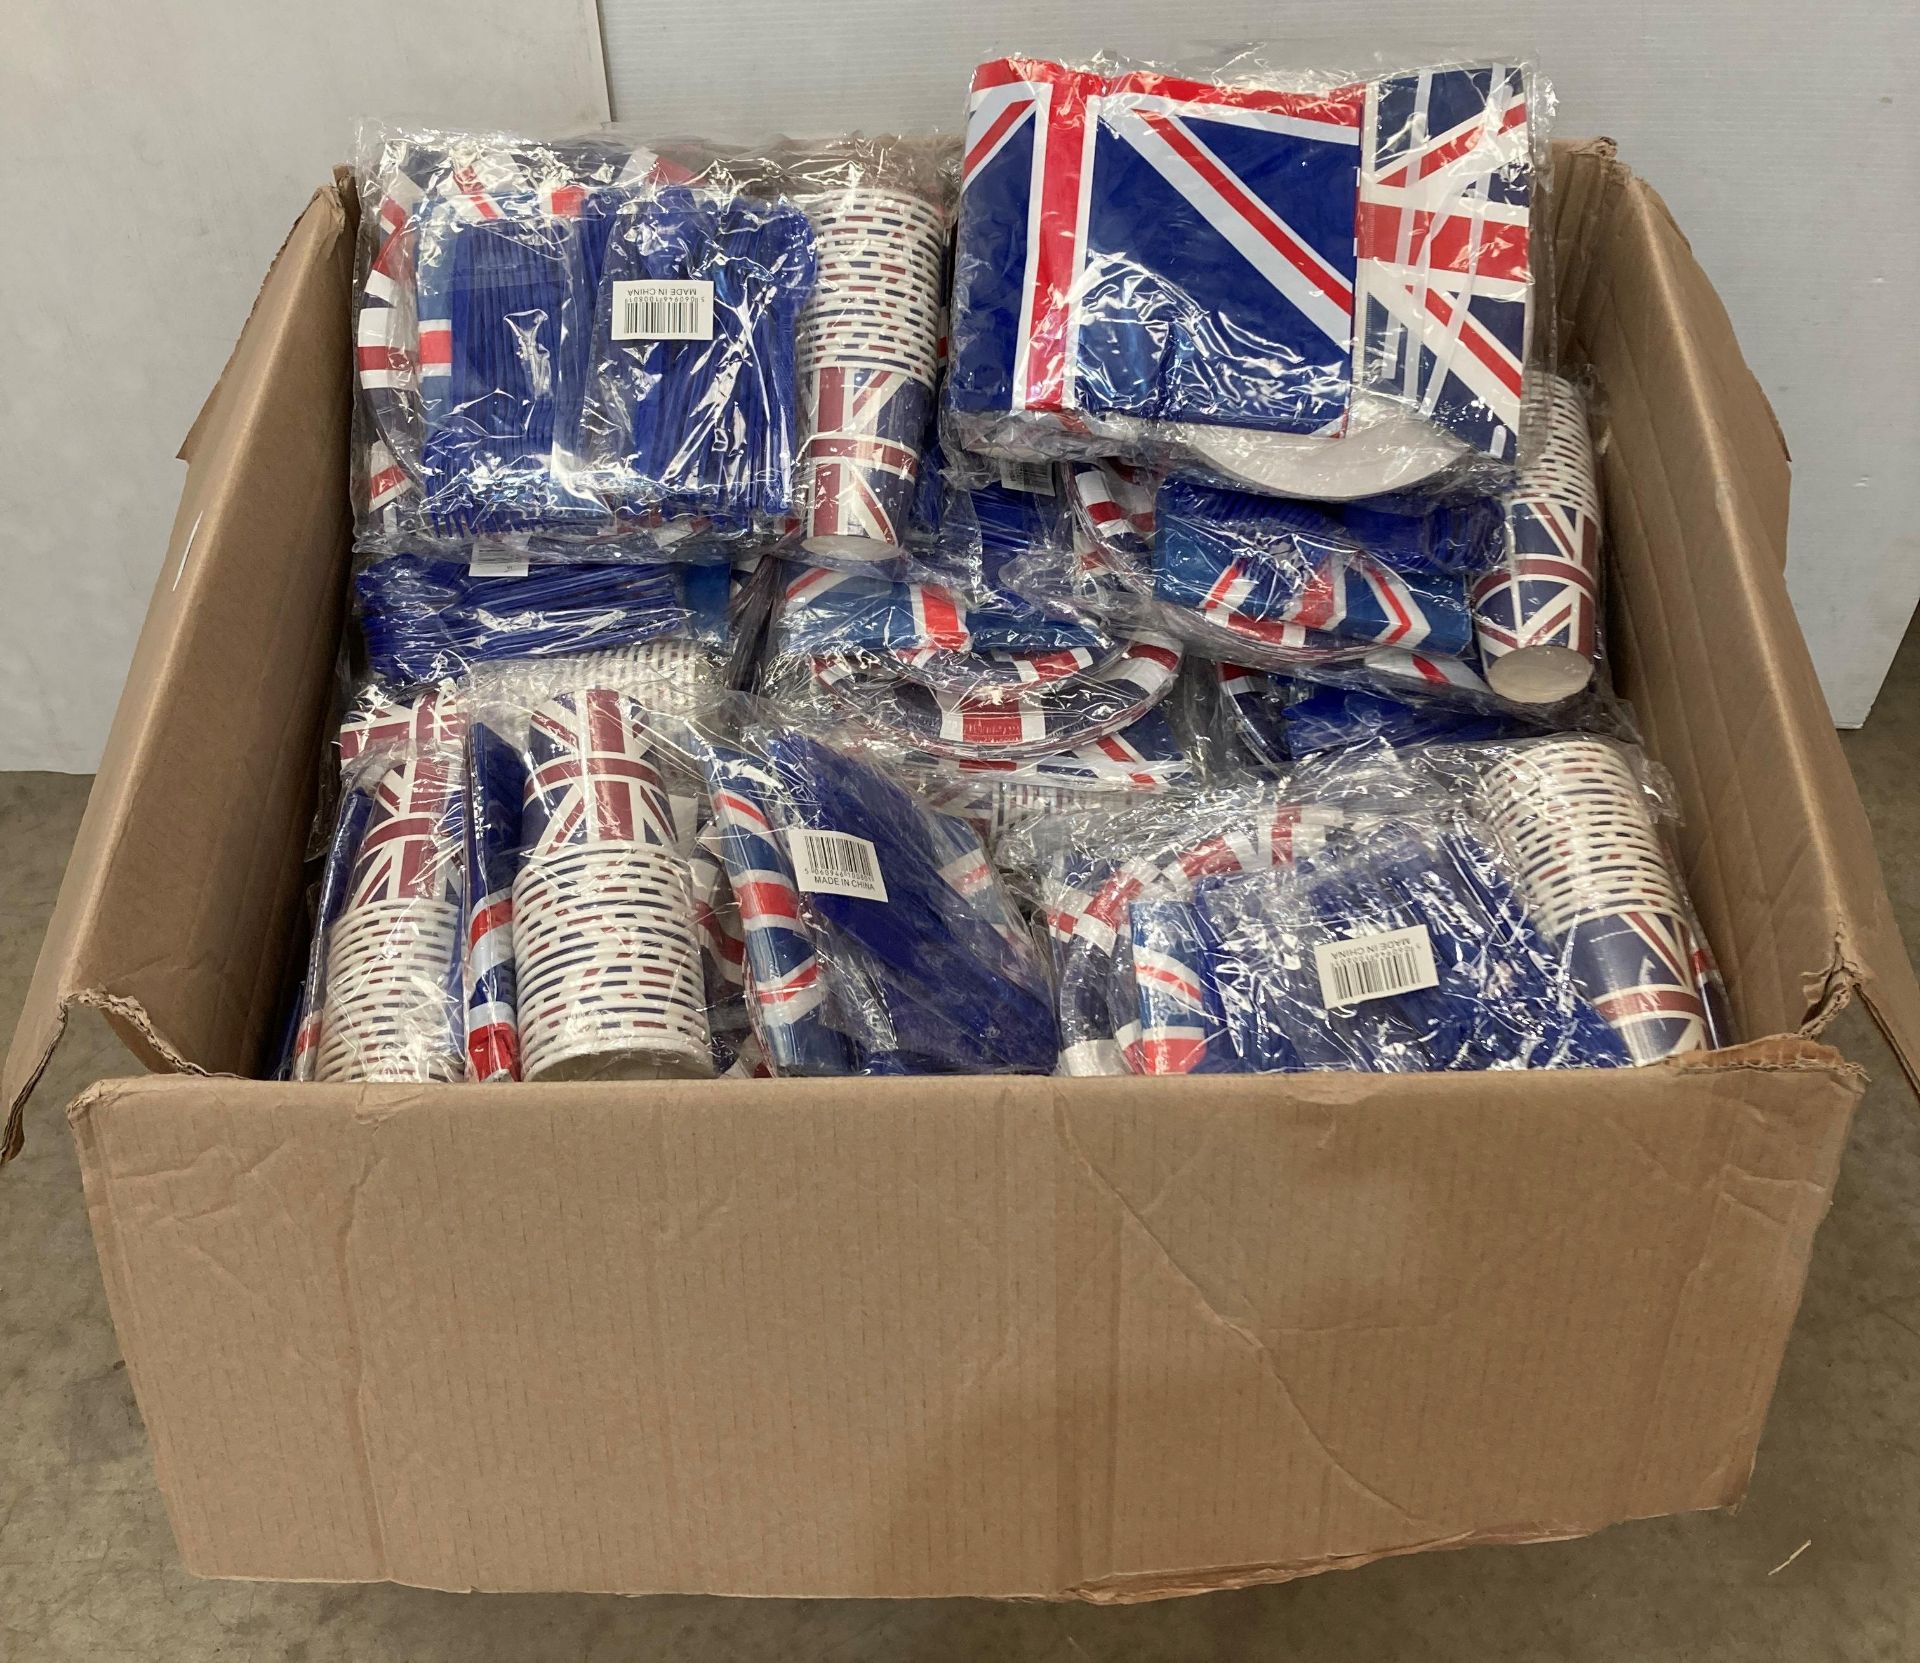 Contents to box - approximately 32 x Union Jack party sets for 16 people containing plastic knives,